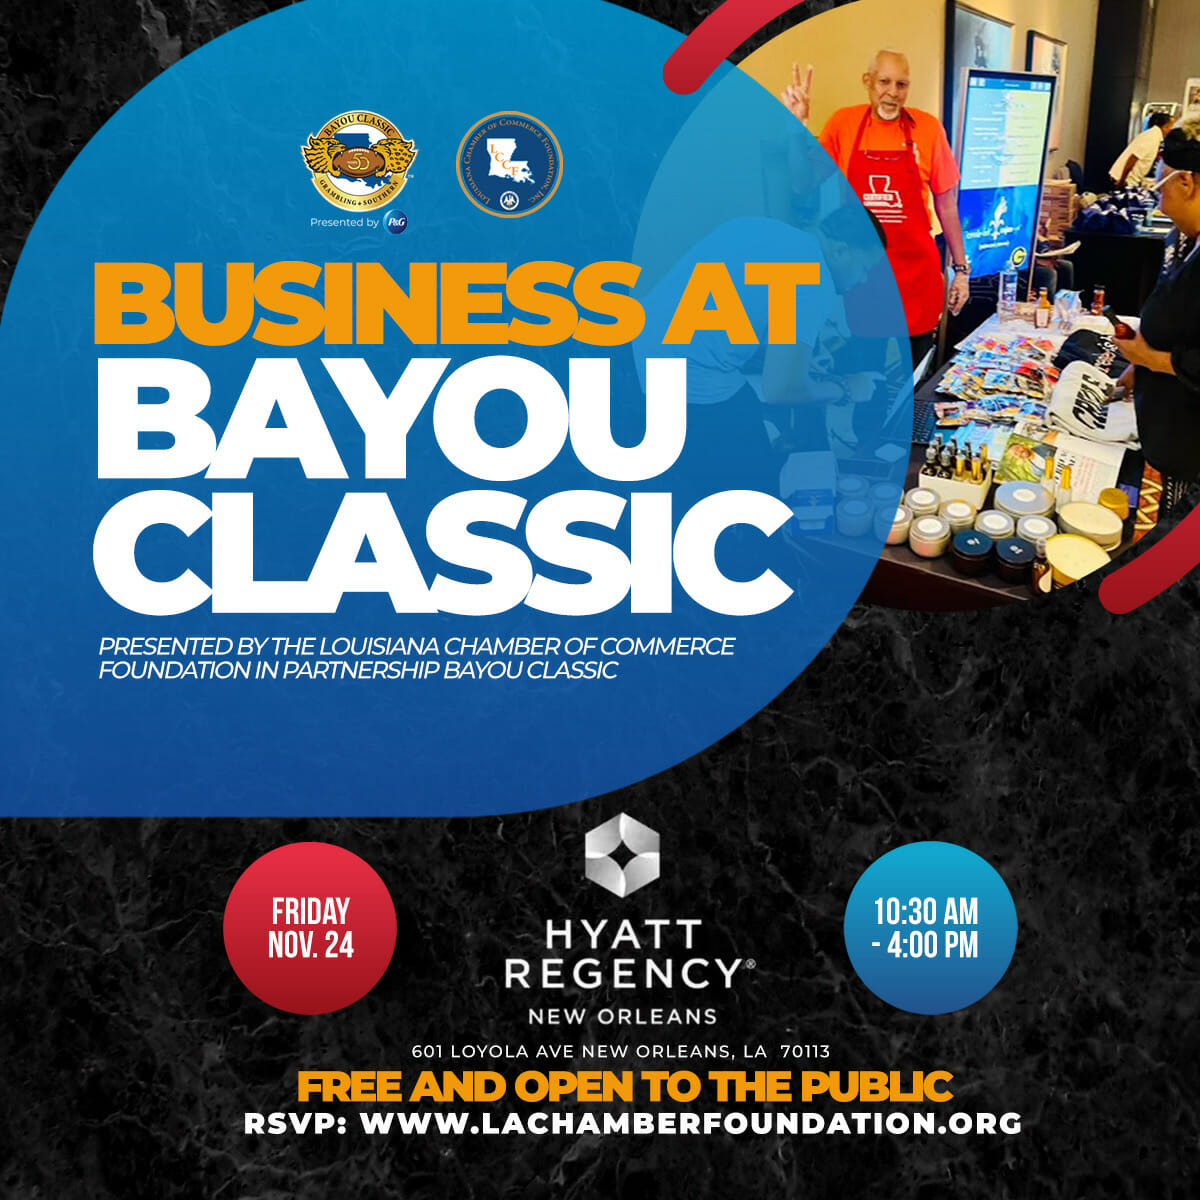 Business at Bayou Classic returns for the 50th anniversary of Bayou Classic to take over New Orleans, Louisiana